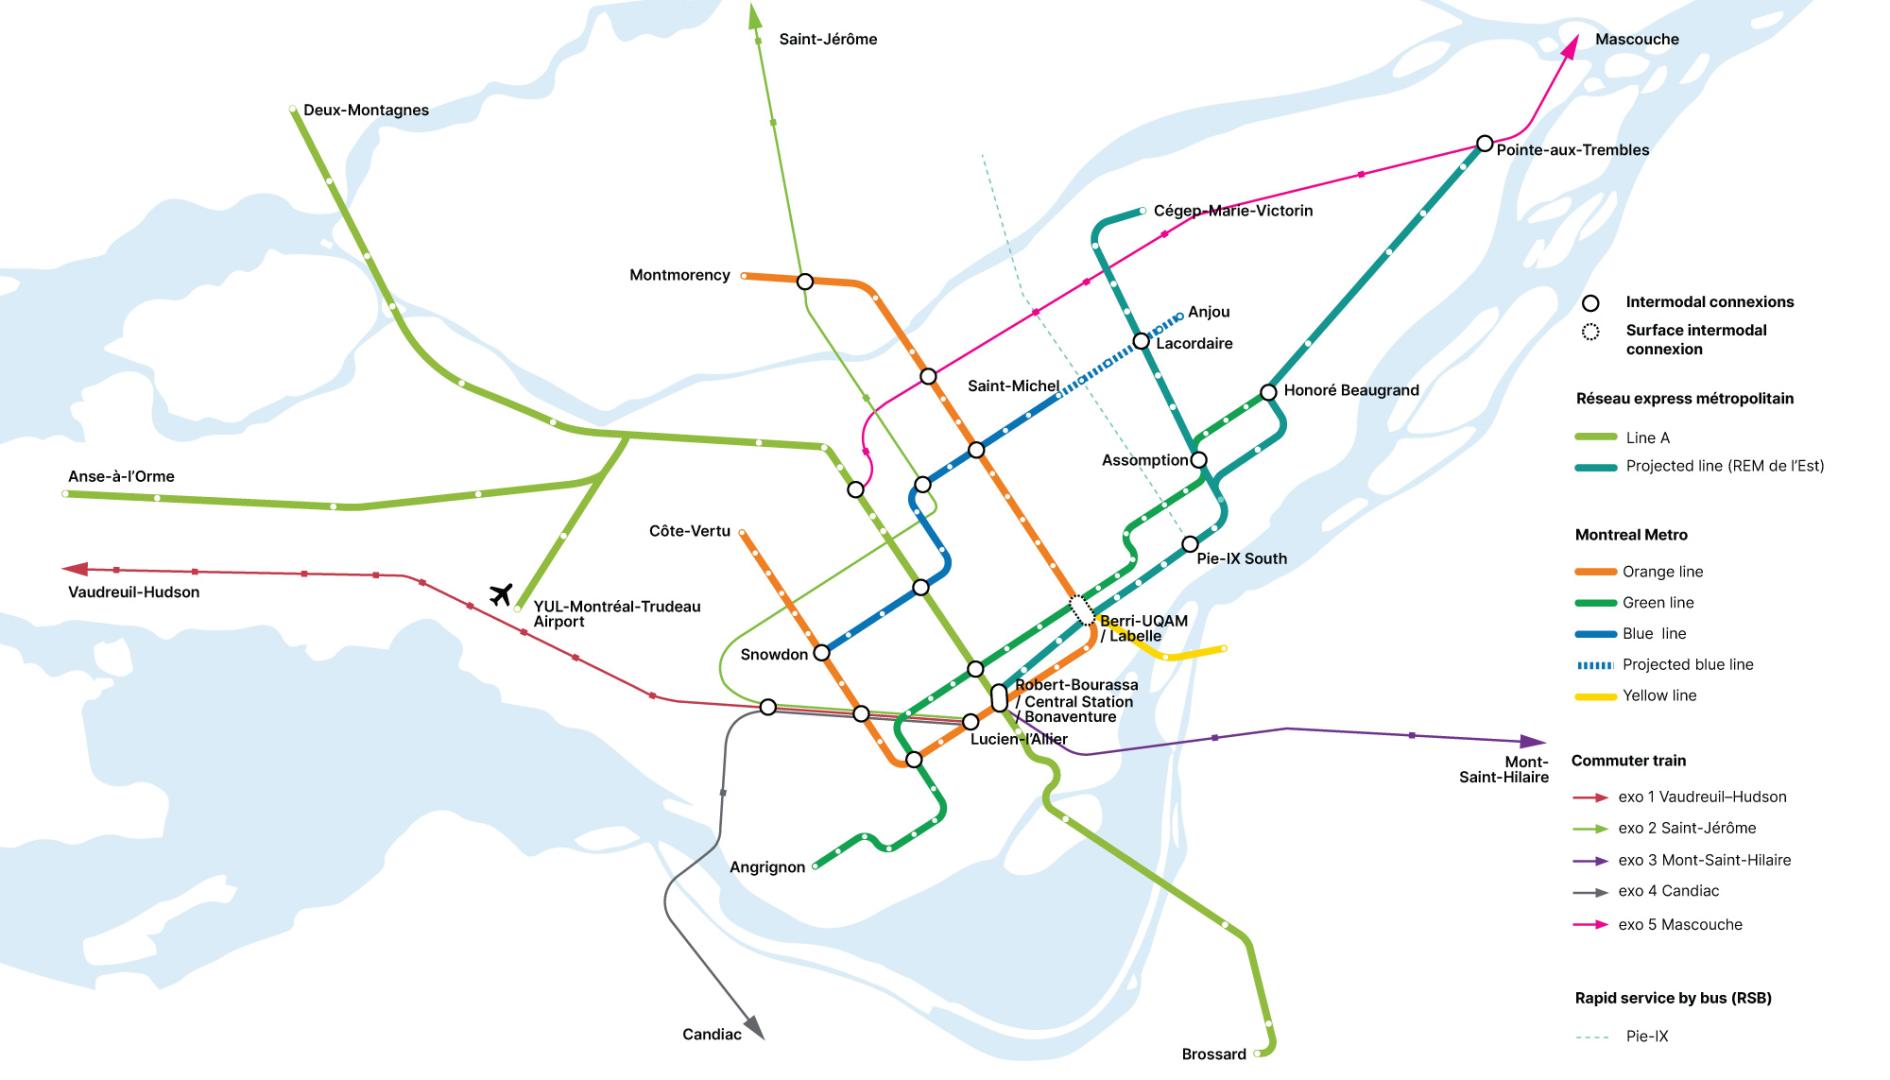 Map of all public transit in the greater Montreal area